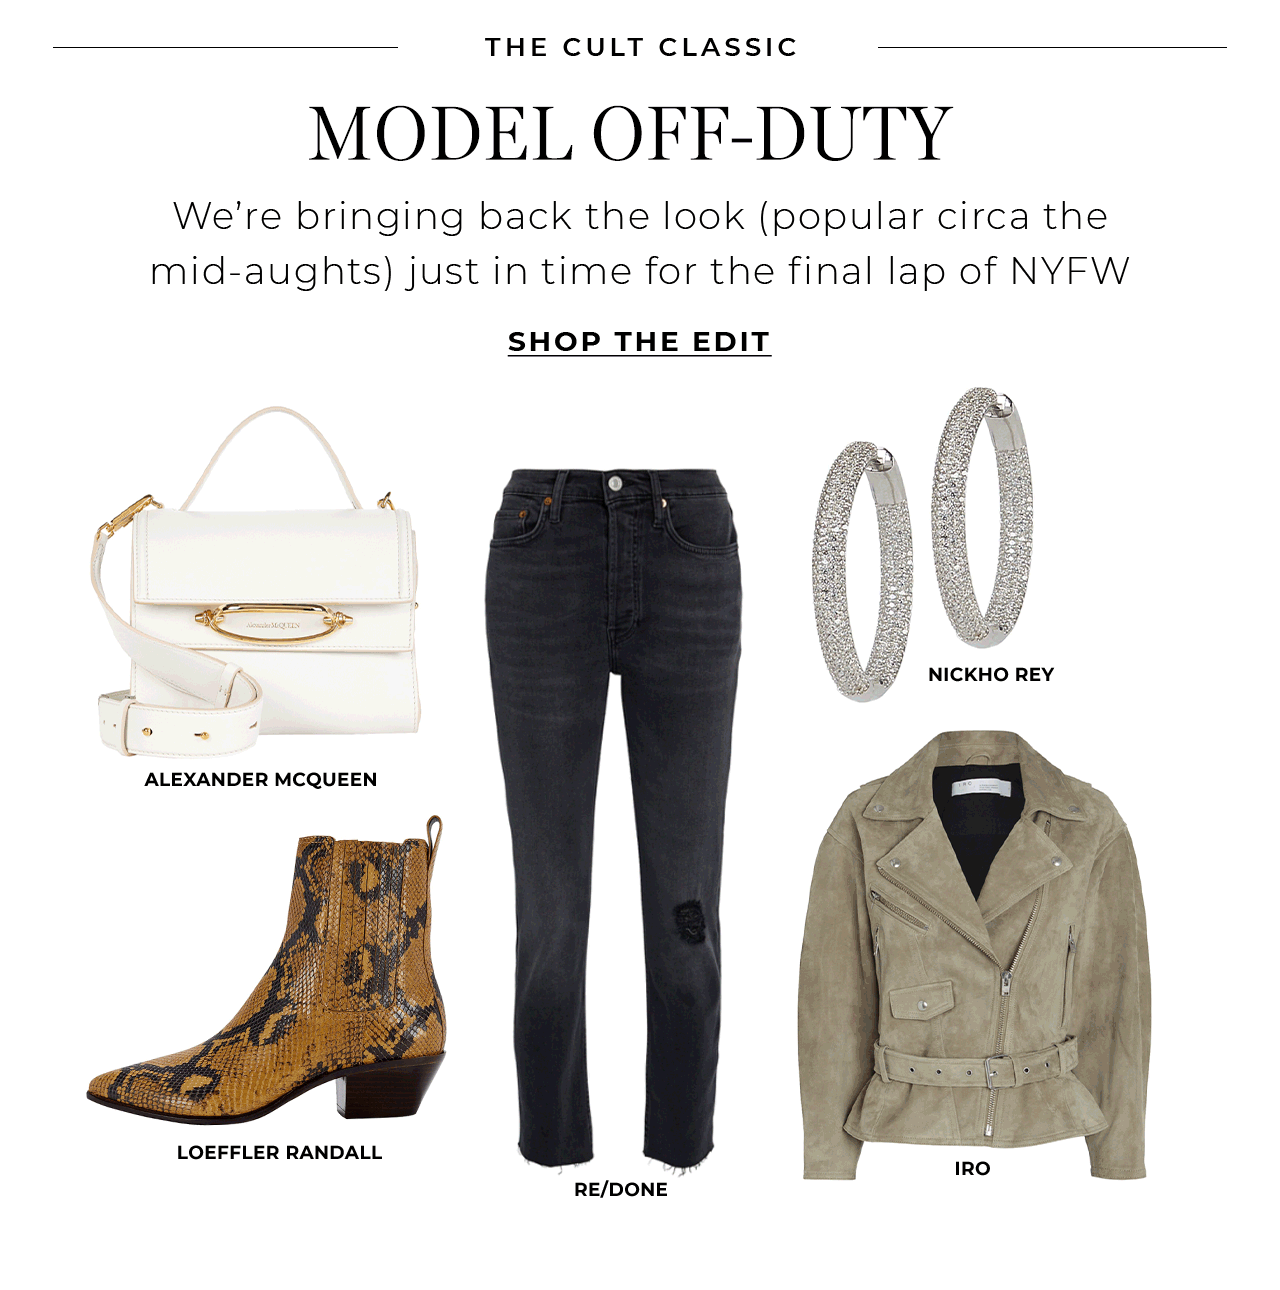 We're bringing back the model off-duty look